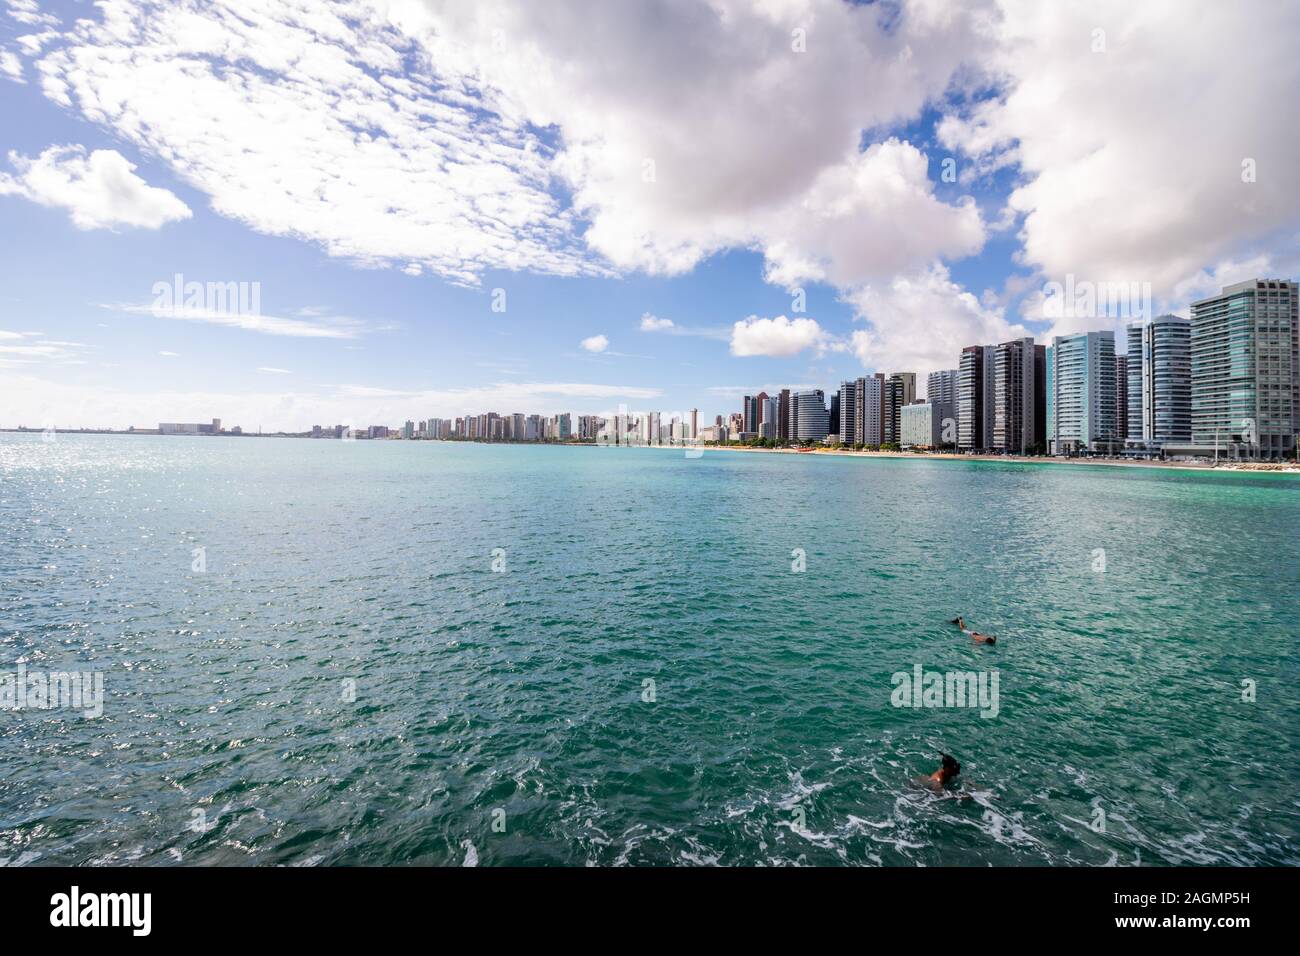 scenes from the seafront of the city of Fortaleza, capital of the state of Ceara, in northeastern Brazil Stock Photo